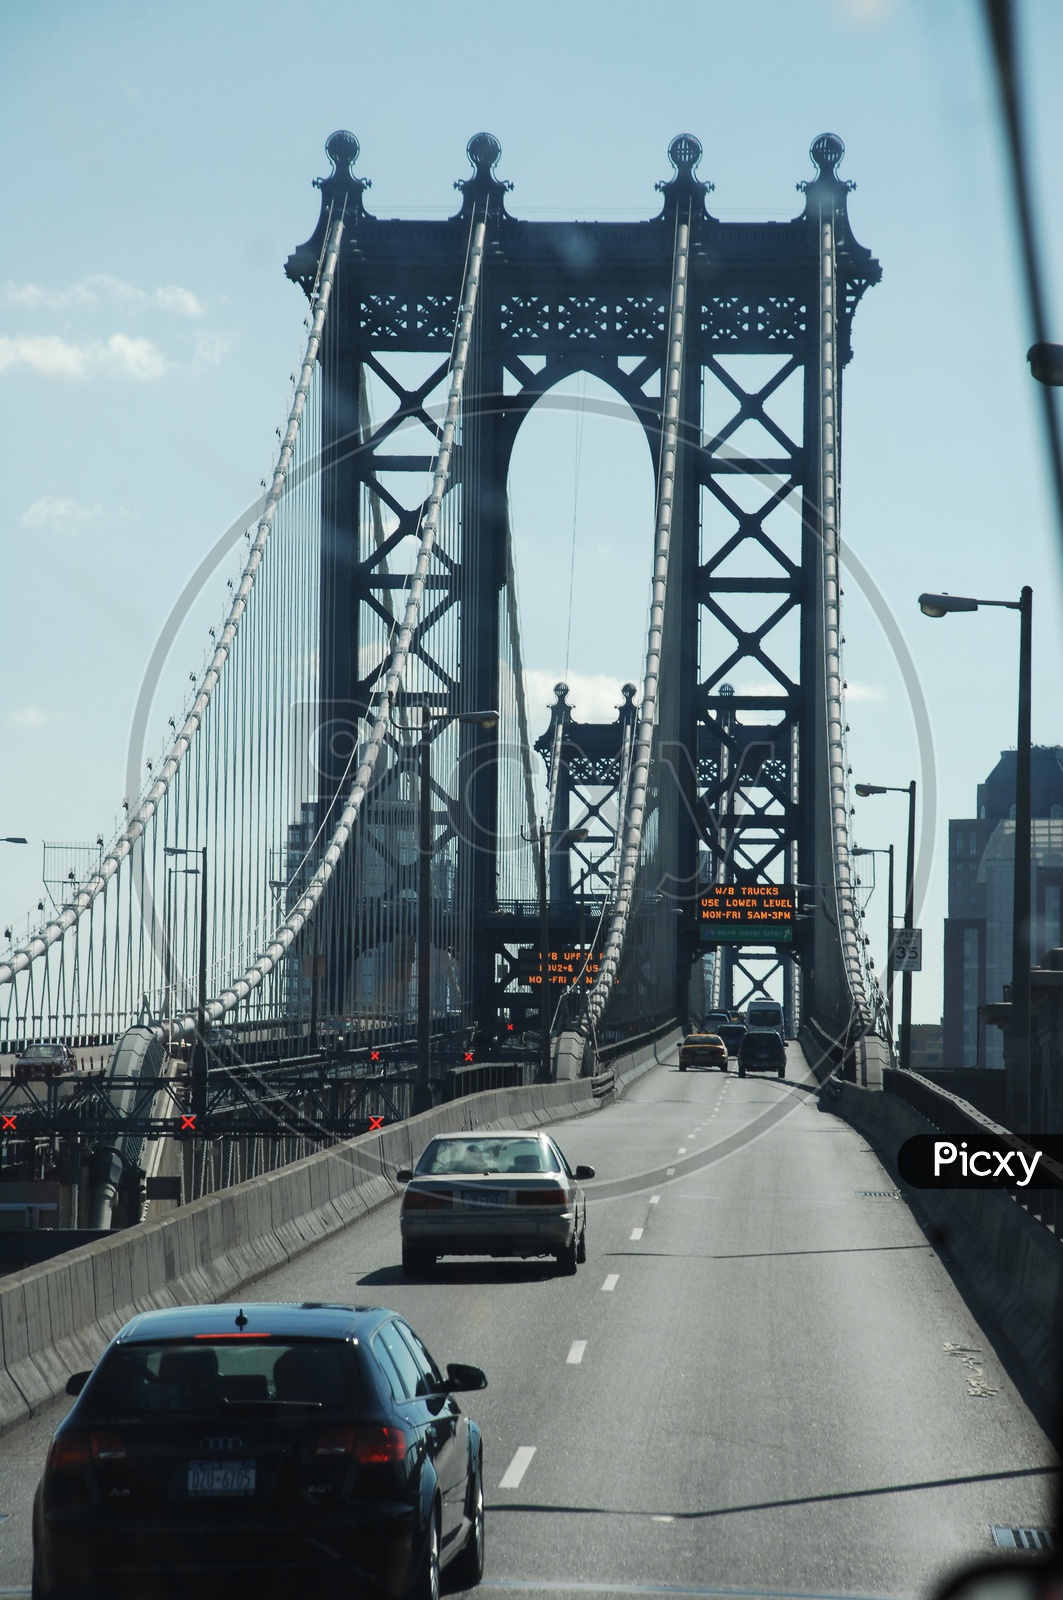 Cars moving on the Brooklyn bridge during a sunny day